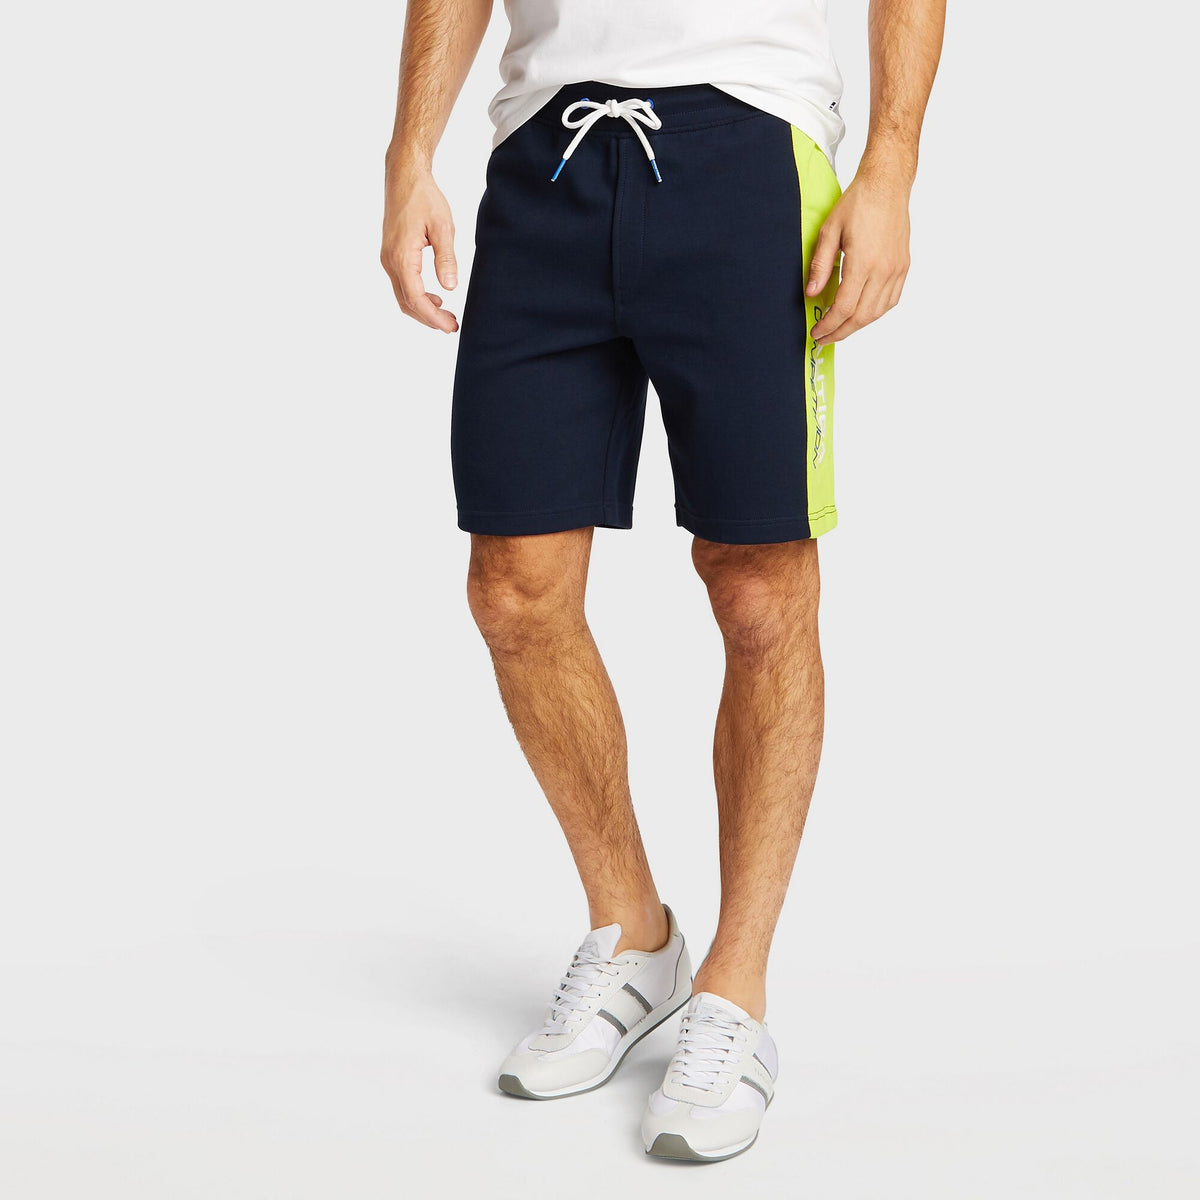 Nautica Men's Big & Tall Competition Classic Fit Shorts Navy